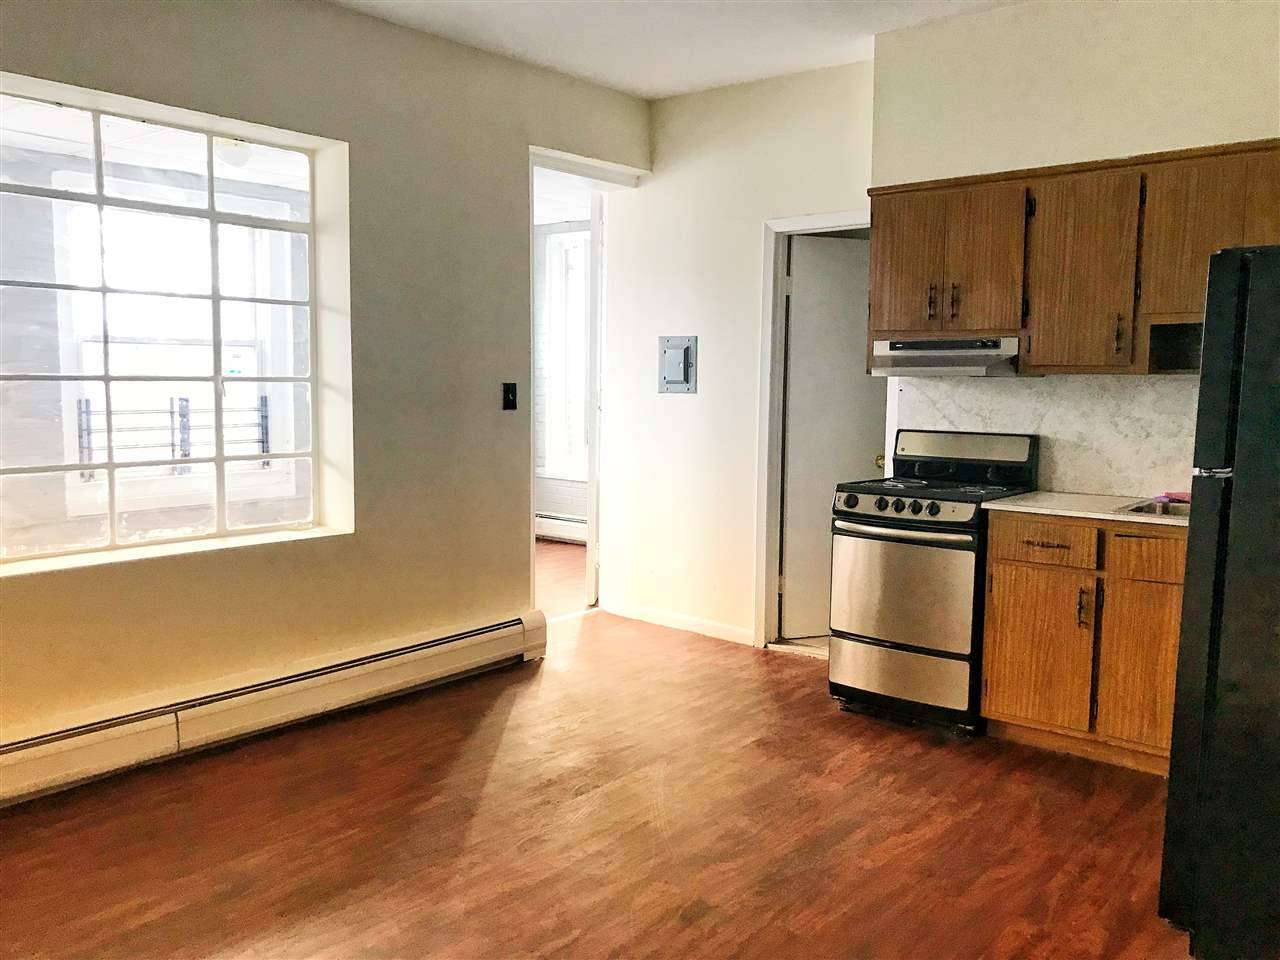 Spacious 1 bedroom with view of the park - 1 BR New Jersey